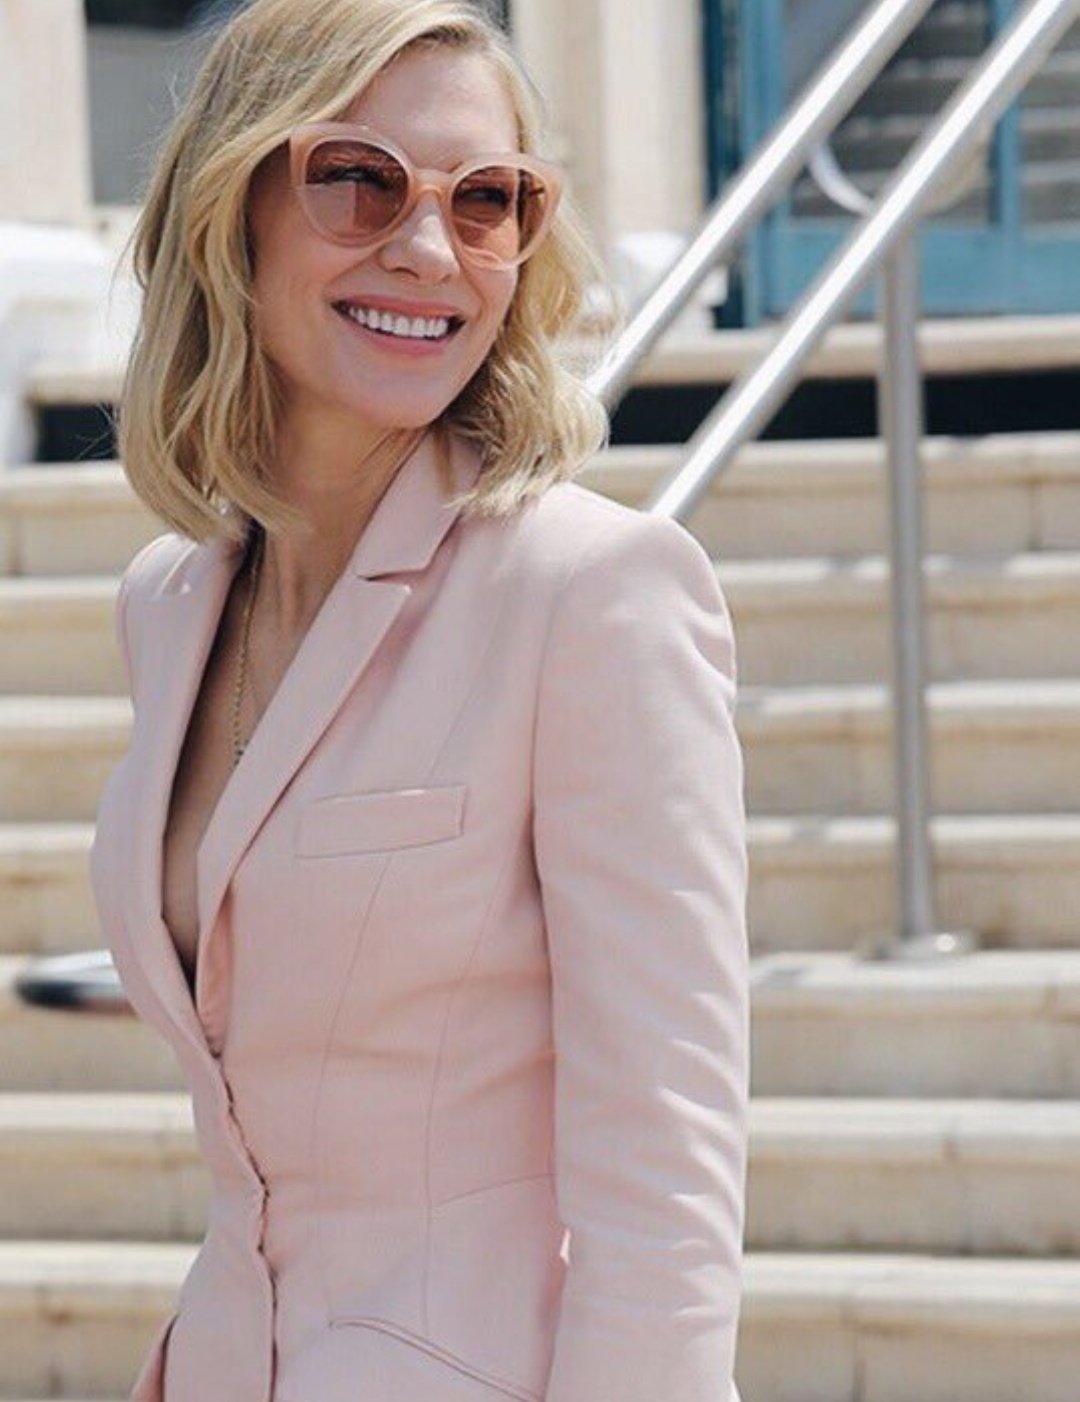 Happy birthday to Cate Blanchett, the talented actress and amazing woman who invented wearing suits! 